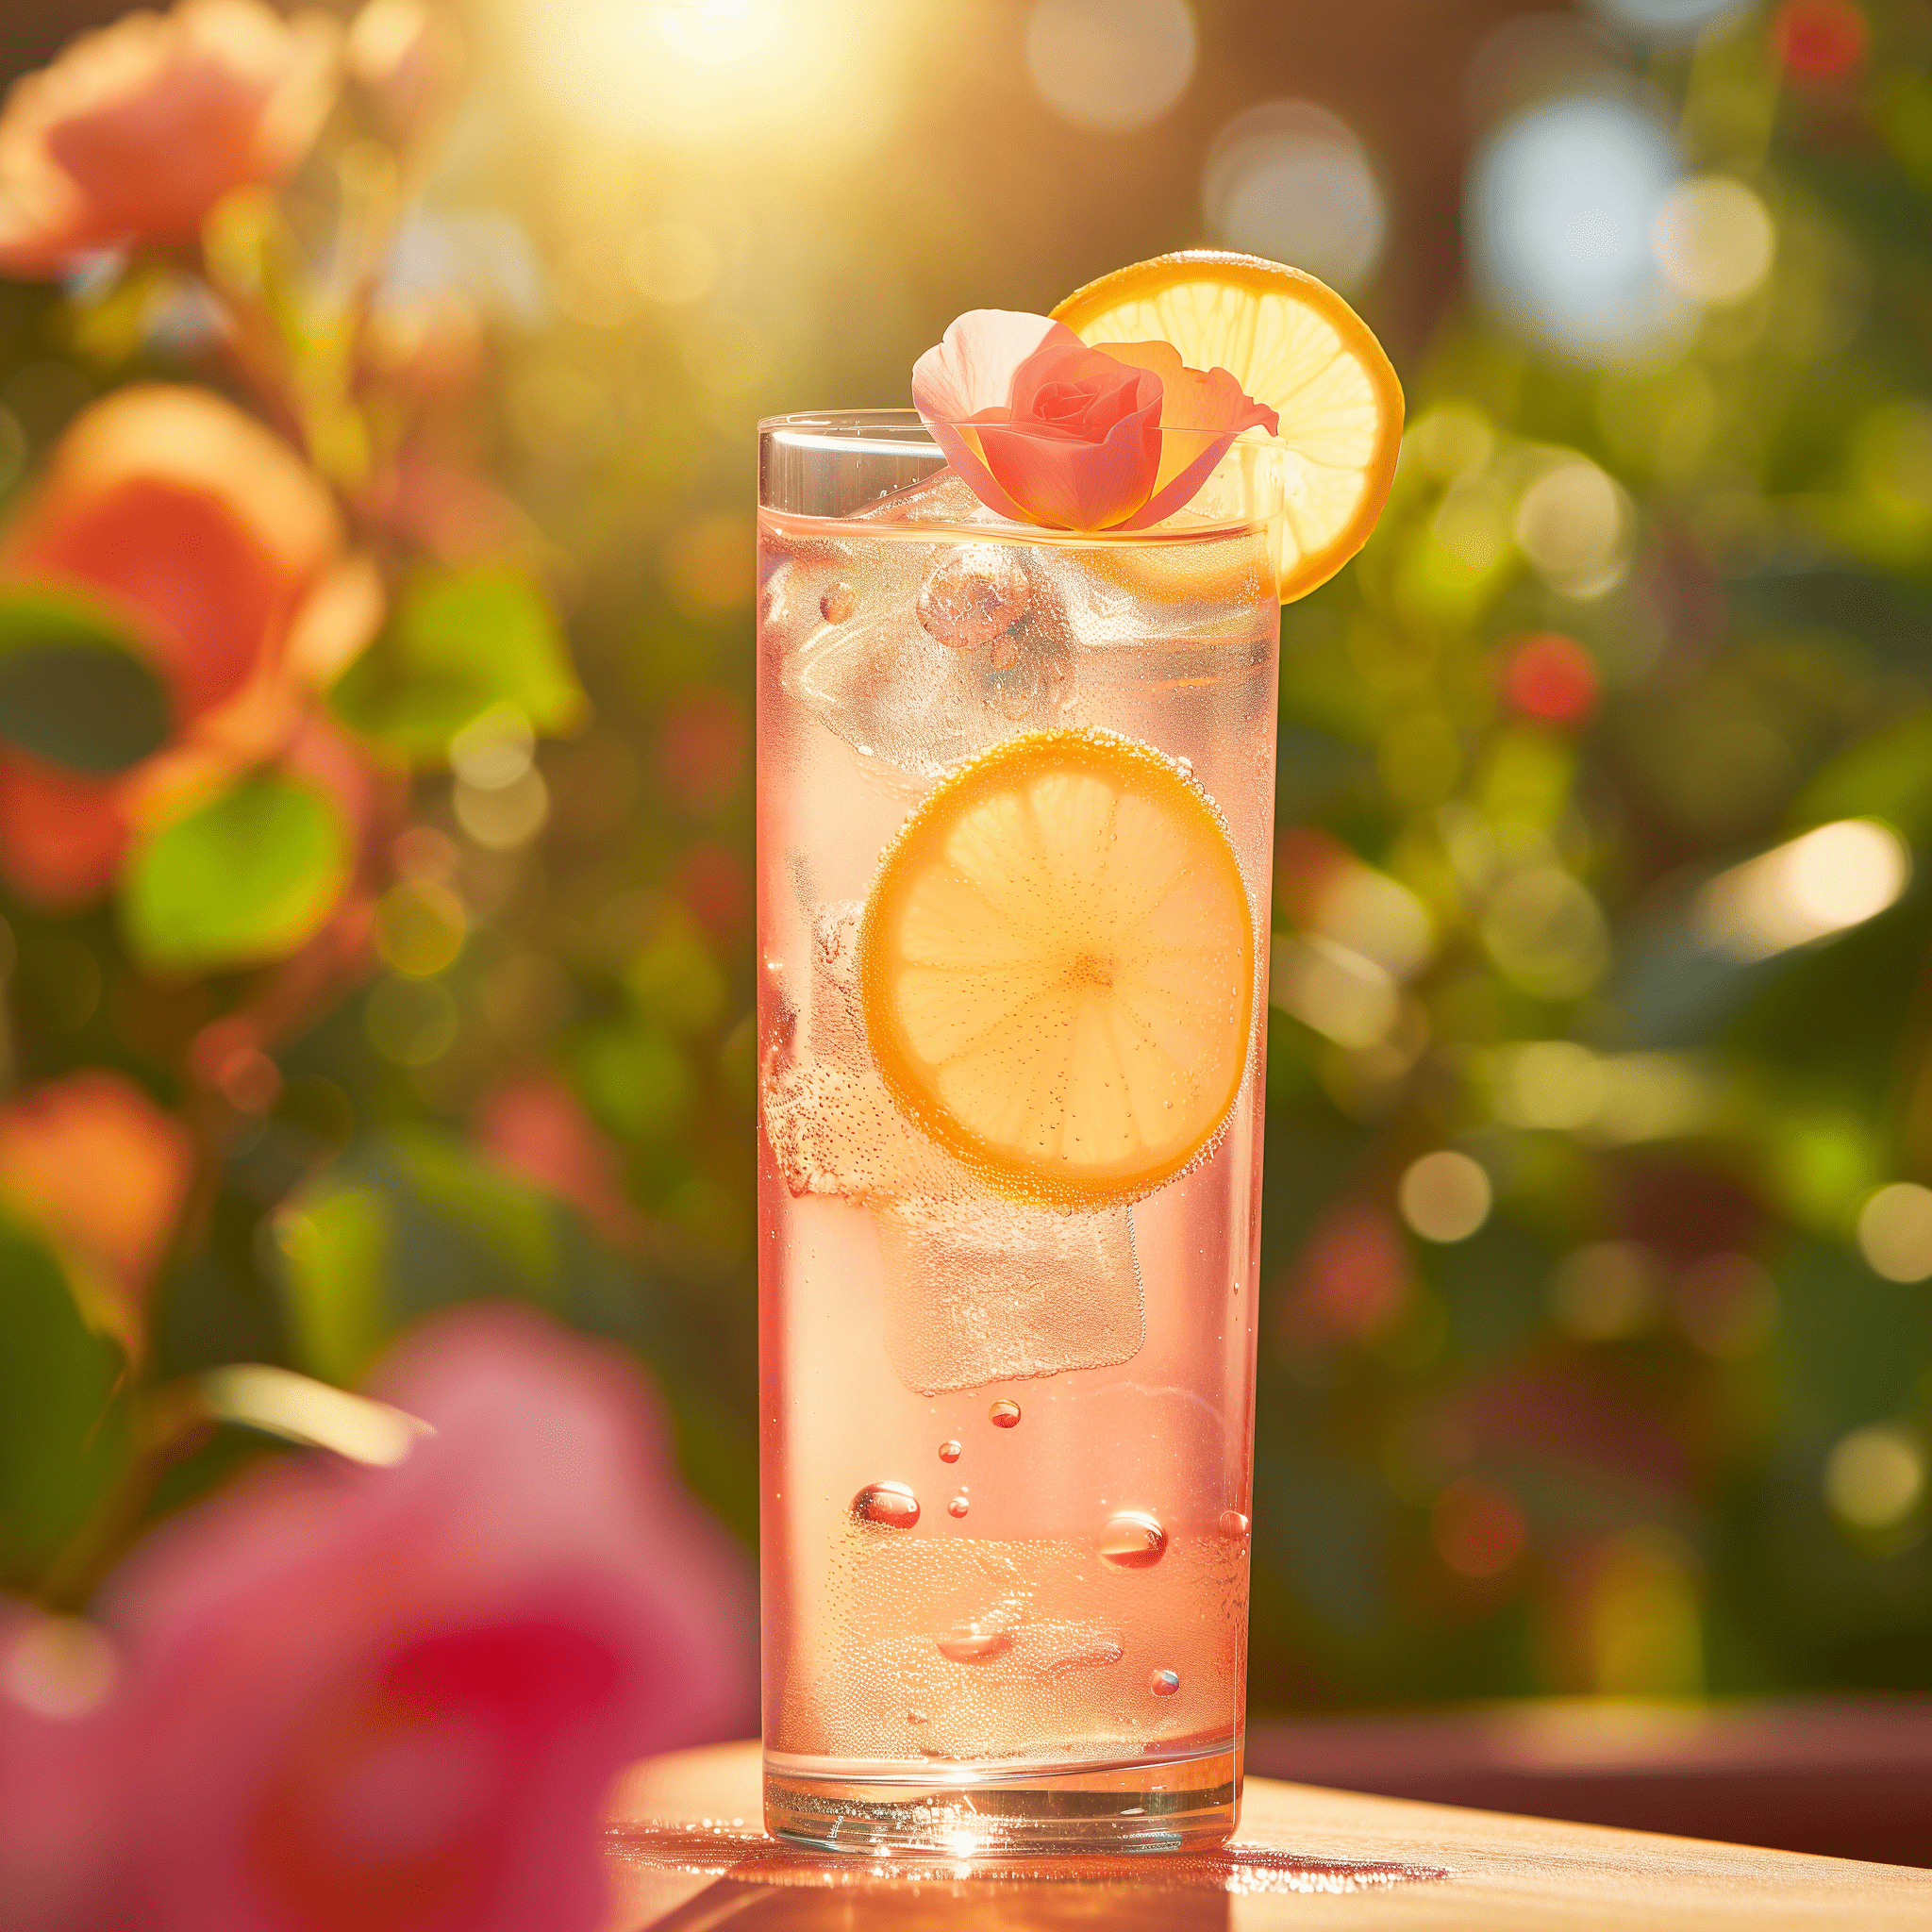 Rose Lemonade Cocktail Recipe - The Rose Lemonade cocktail is a harmonious blend of sweet and tart flavors. The rose syrup provides a fragrant sweetness that is perfectly balanced by the bright acidity of fresh lemon juice. The sparkling water adds a bubbly texture that makes the drink light and refreshing.